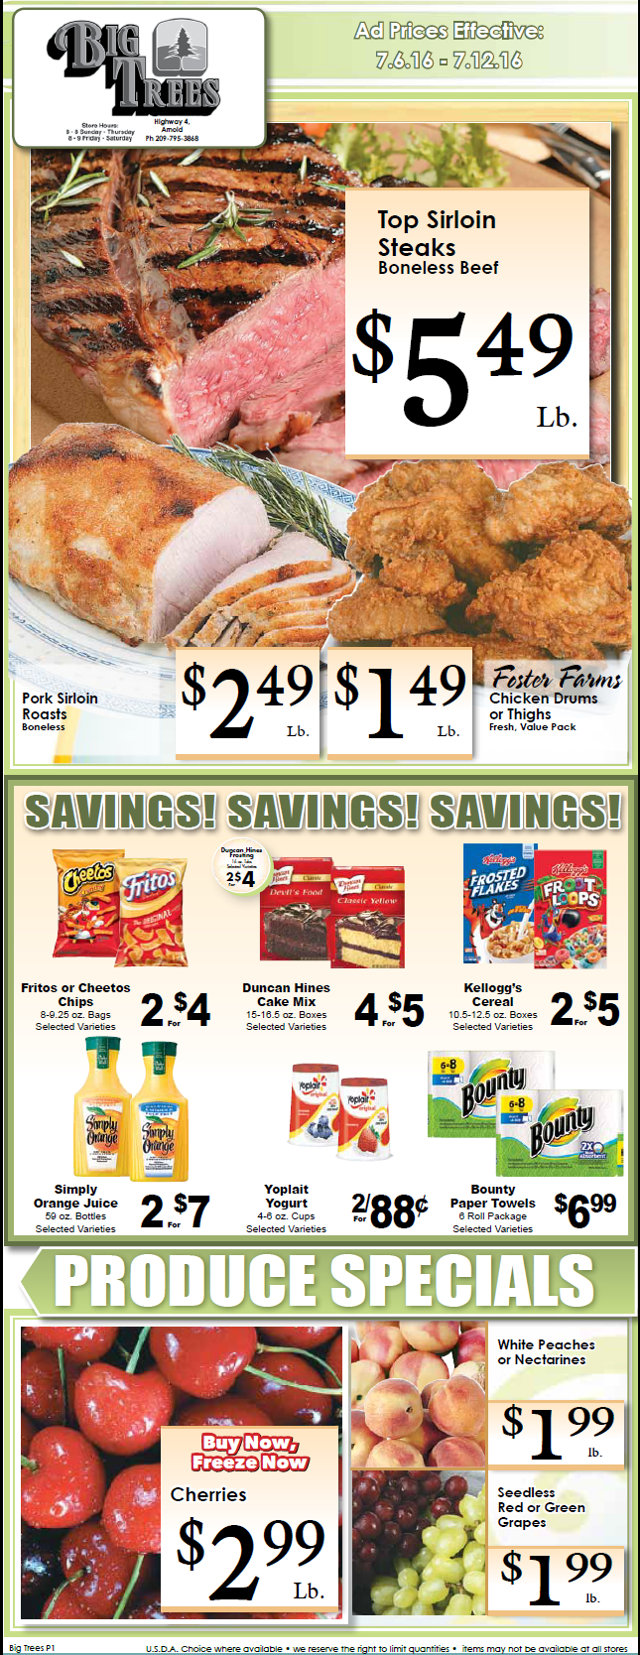 Big Trees Market Weekly Ad & Specials Through July 12th